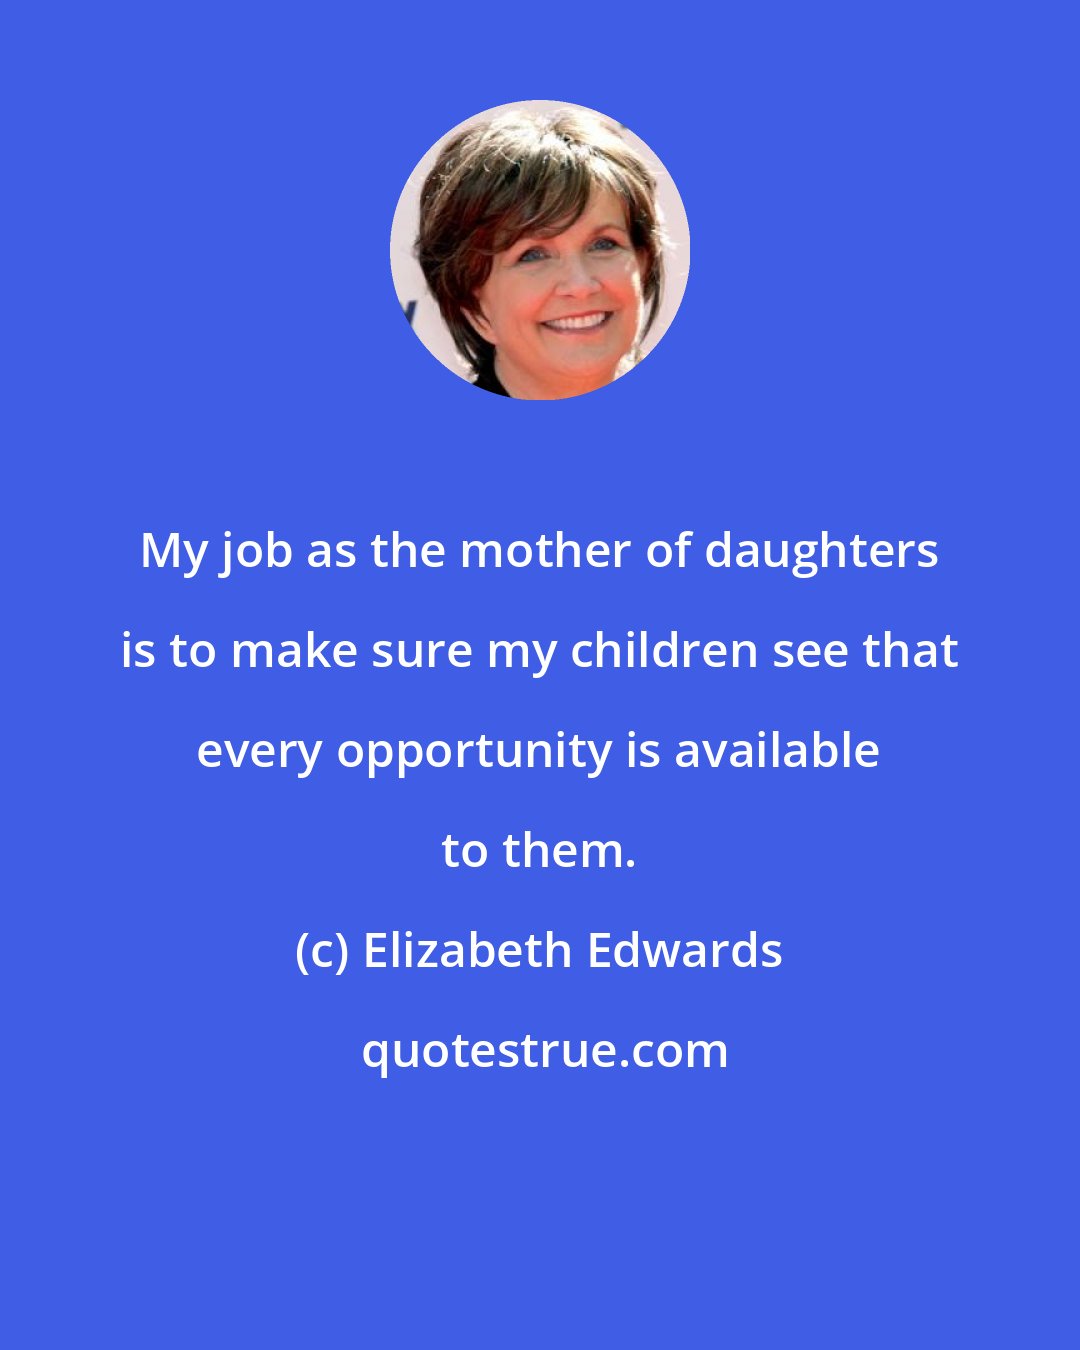 Elizabeth Edwards: My job as the mother of daughters is to make sure my children see that every opportunity is available to them.